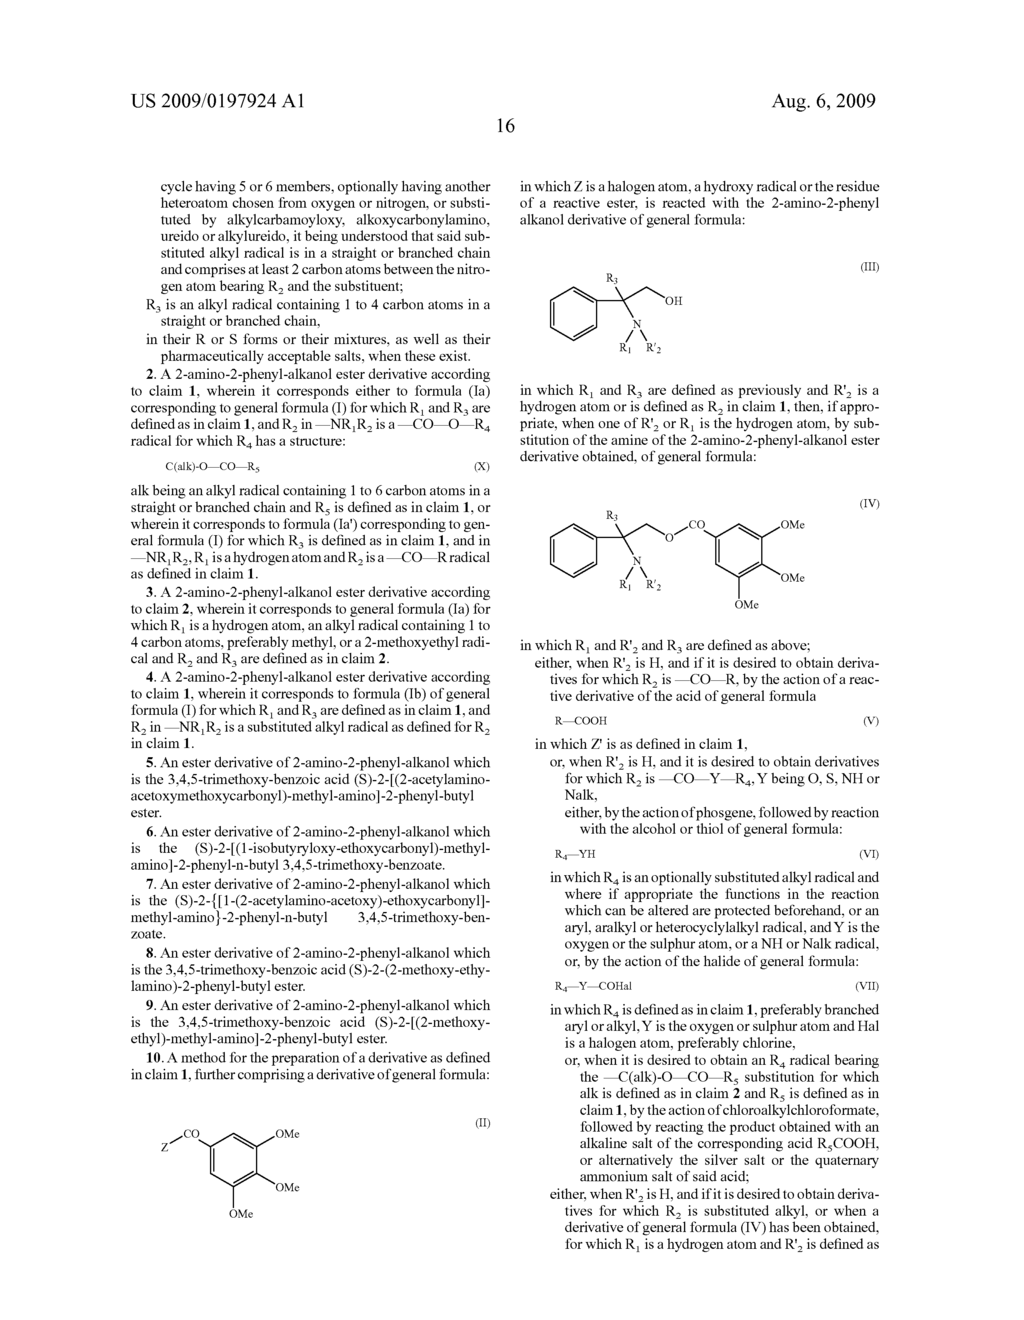 2-AMINO-2-PHENYL-ALKANOL DERIVATIVES, THEIR PREPARATION AND PHARMACEUTICAL COMPOSITIONS CONTAINING THEM - diagram, schematic, and image 17